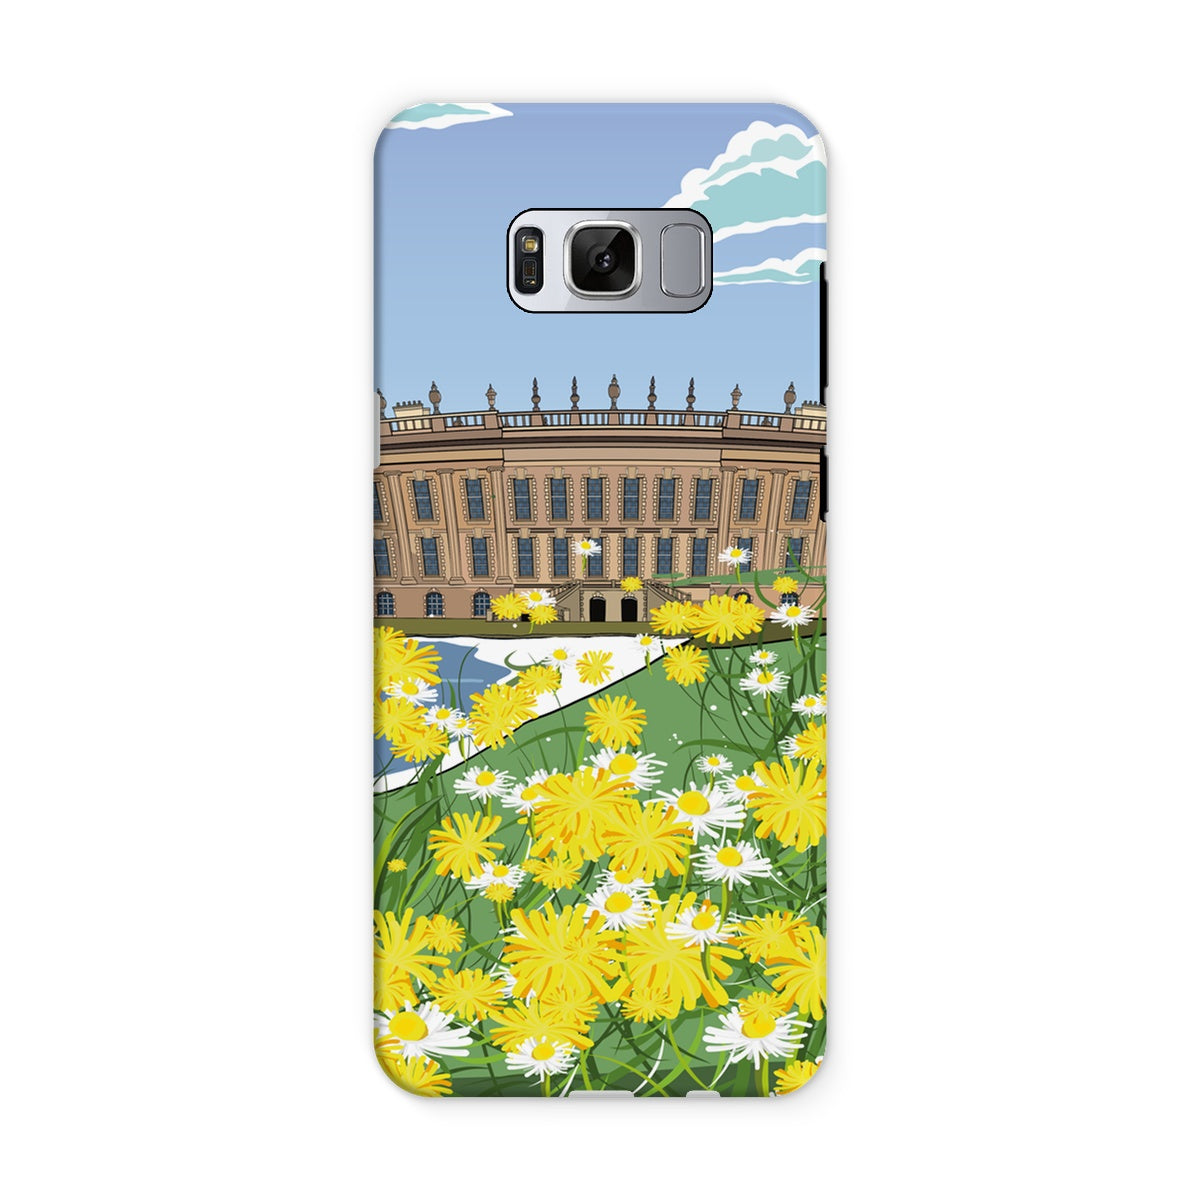 Chatsworth - In Bloom Tough Phone Case